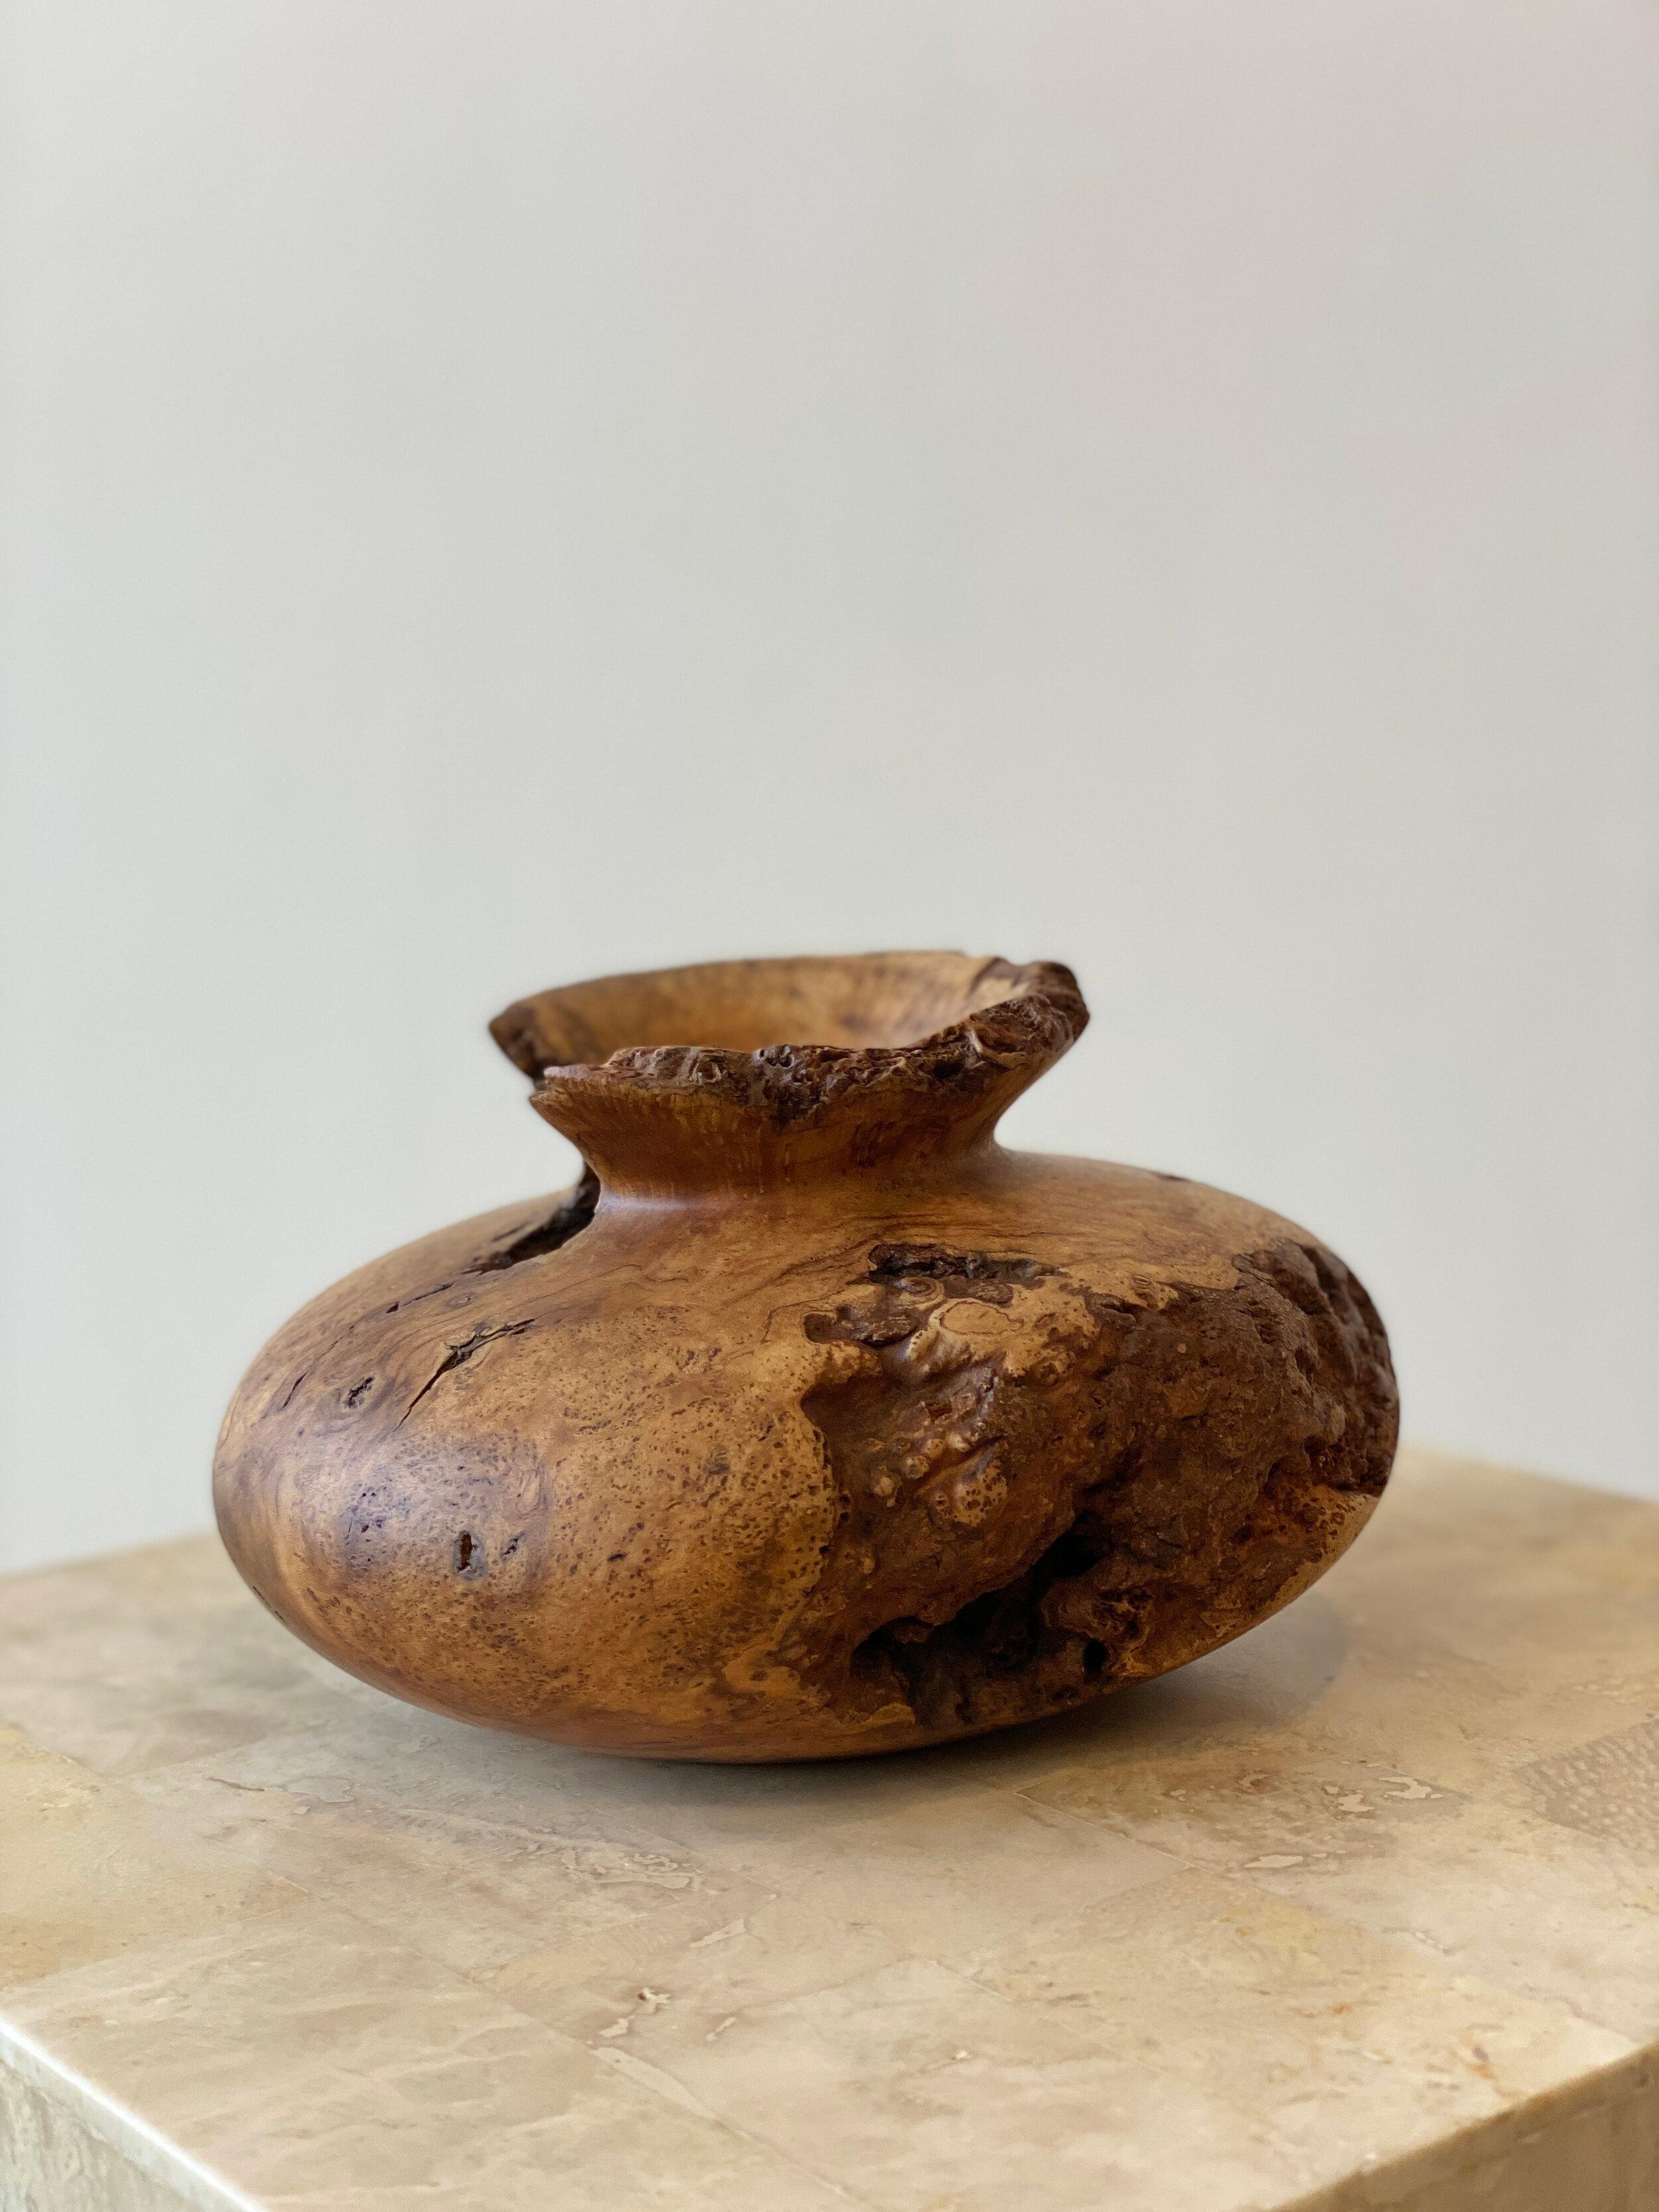 Organic Modern Melvin Lindquist Sculptural Turned Cherry Burl Wood Vase, Signed and Dated 1978 For Sale